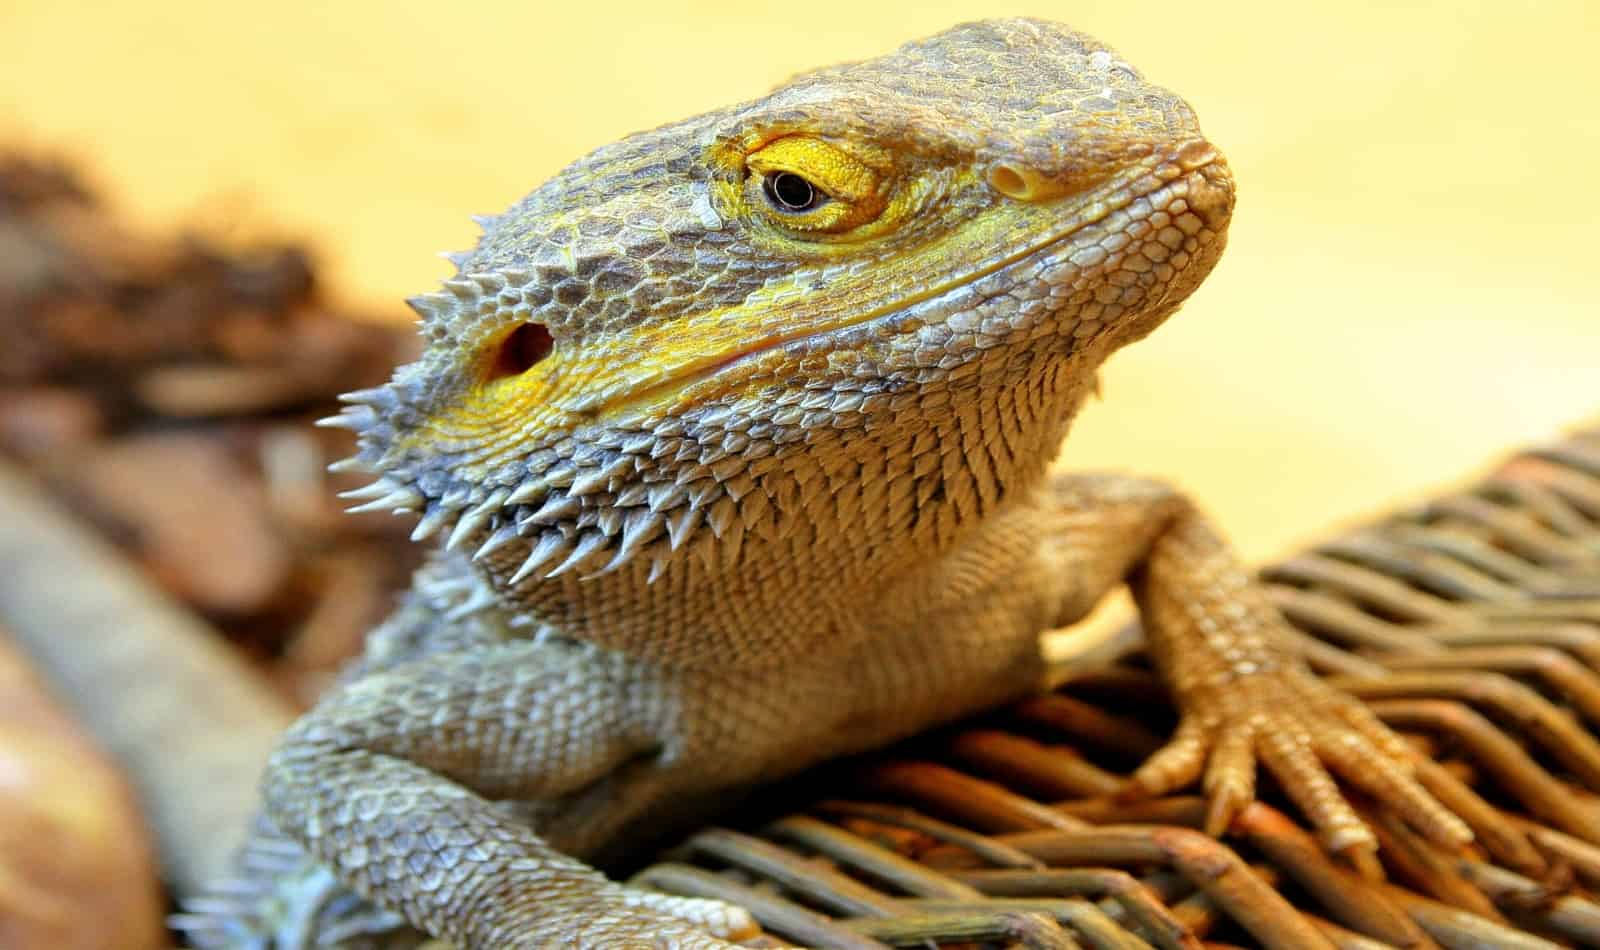 100 Ideas for Badass Dragon Names for Your Beardie [Males & Females]